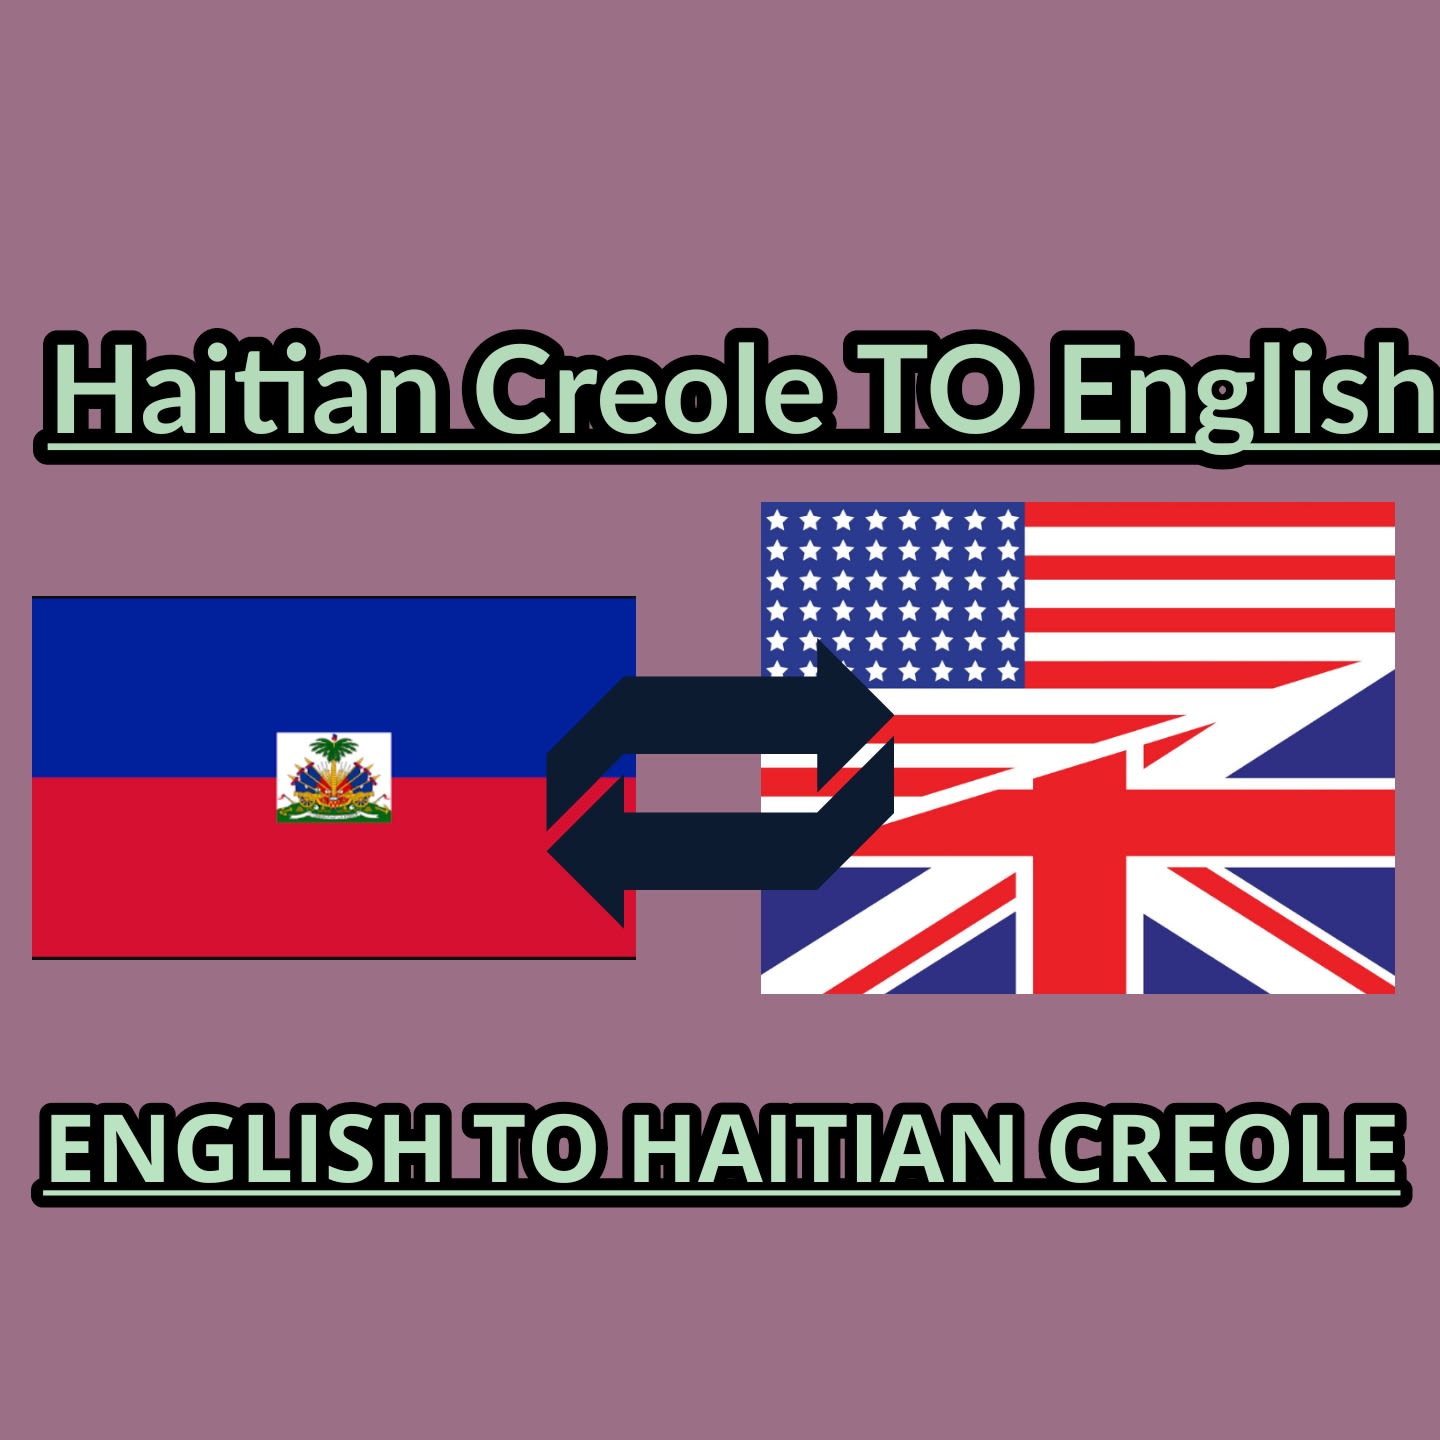 Translate Haitian Creole To English And Vice Versa By Samanthapro | Fiverr